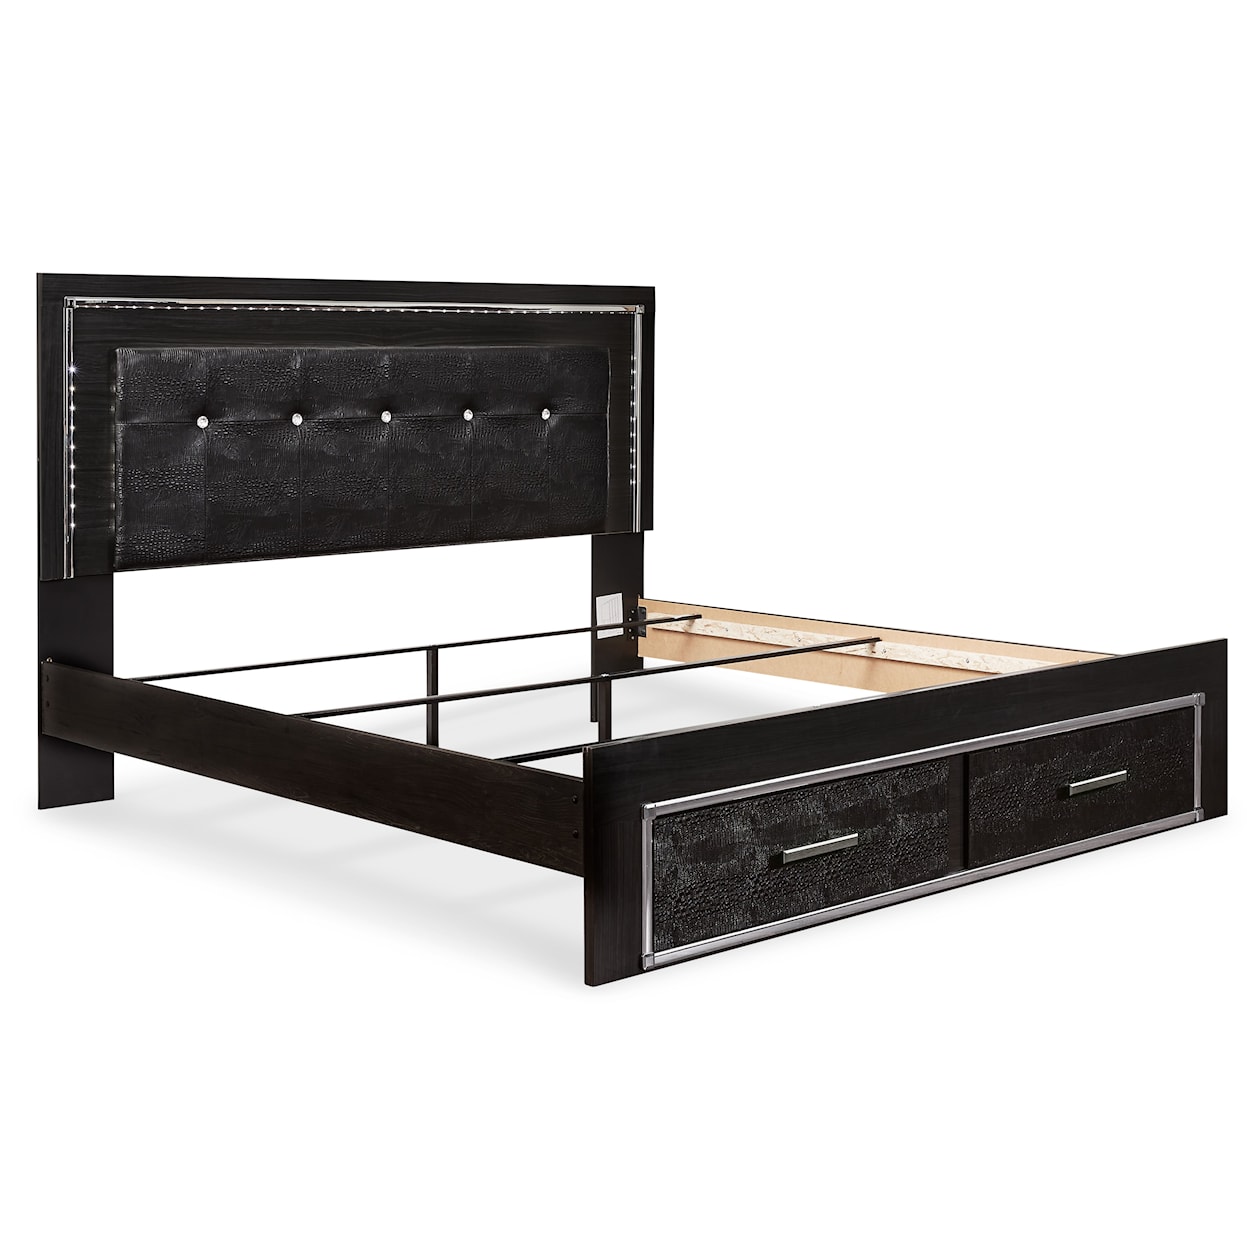 Ashley Furniture Signature Design Kaydell King Panel Bed with Storage